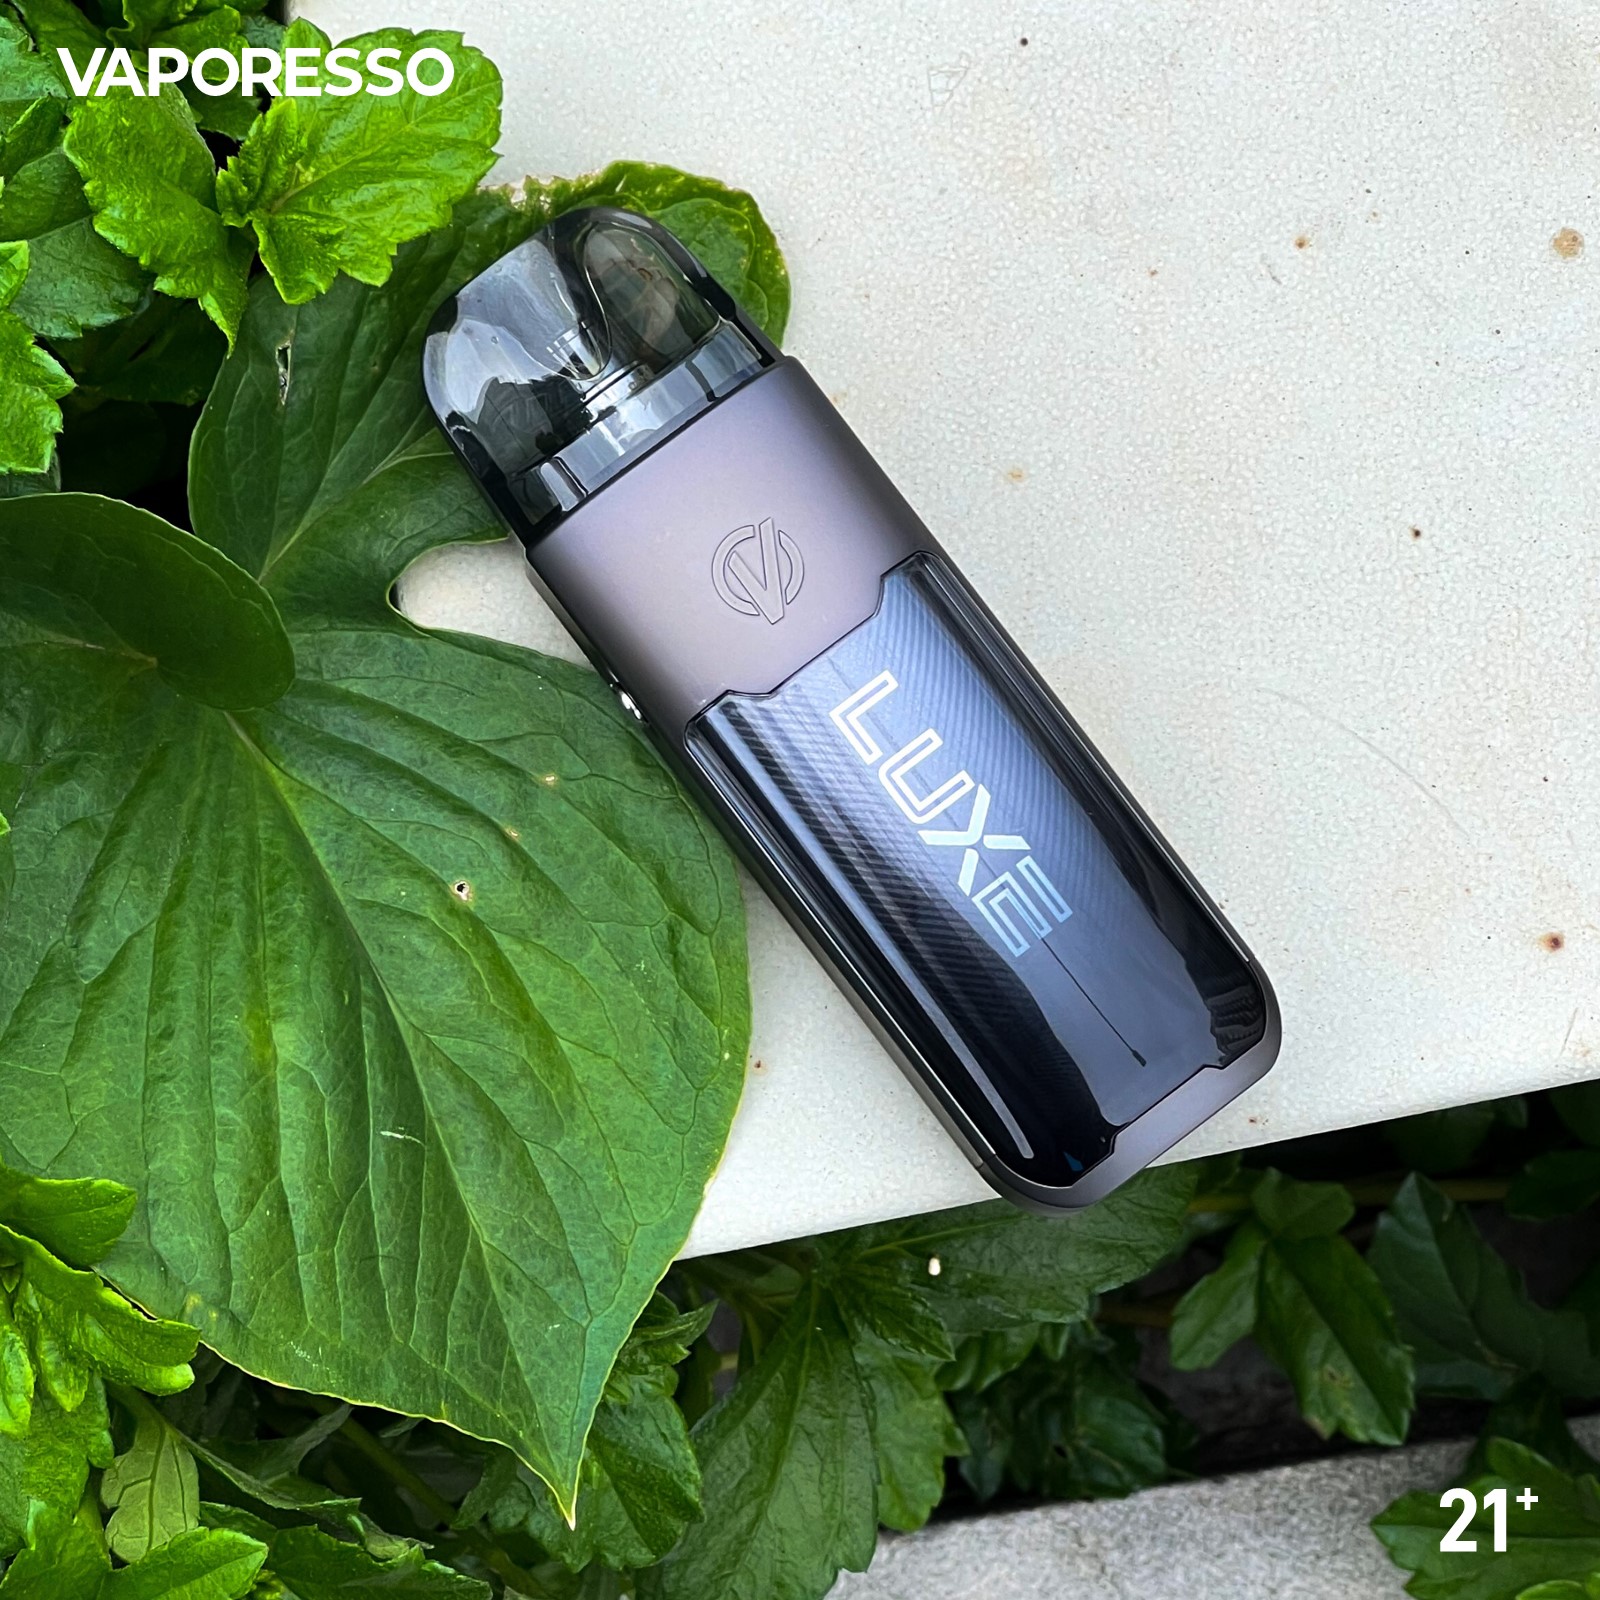 Vaporesso Vaping Chronicles: A User’s Journey Through Flavorful Adventures